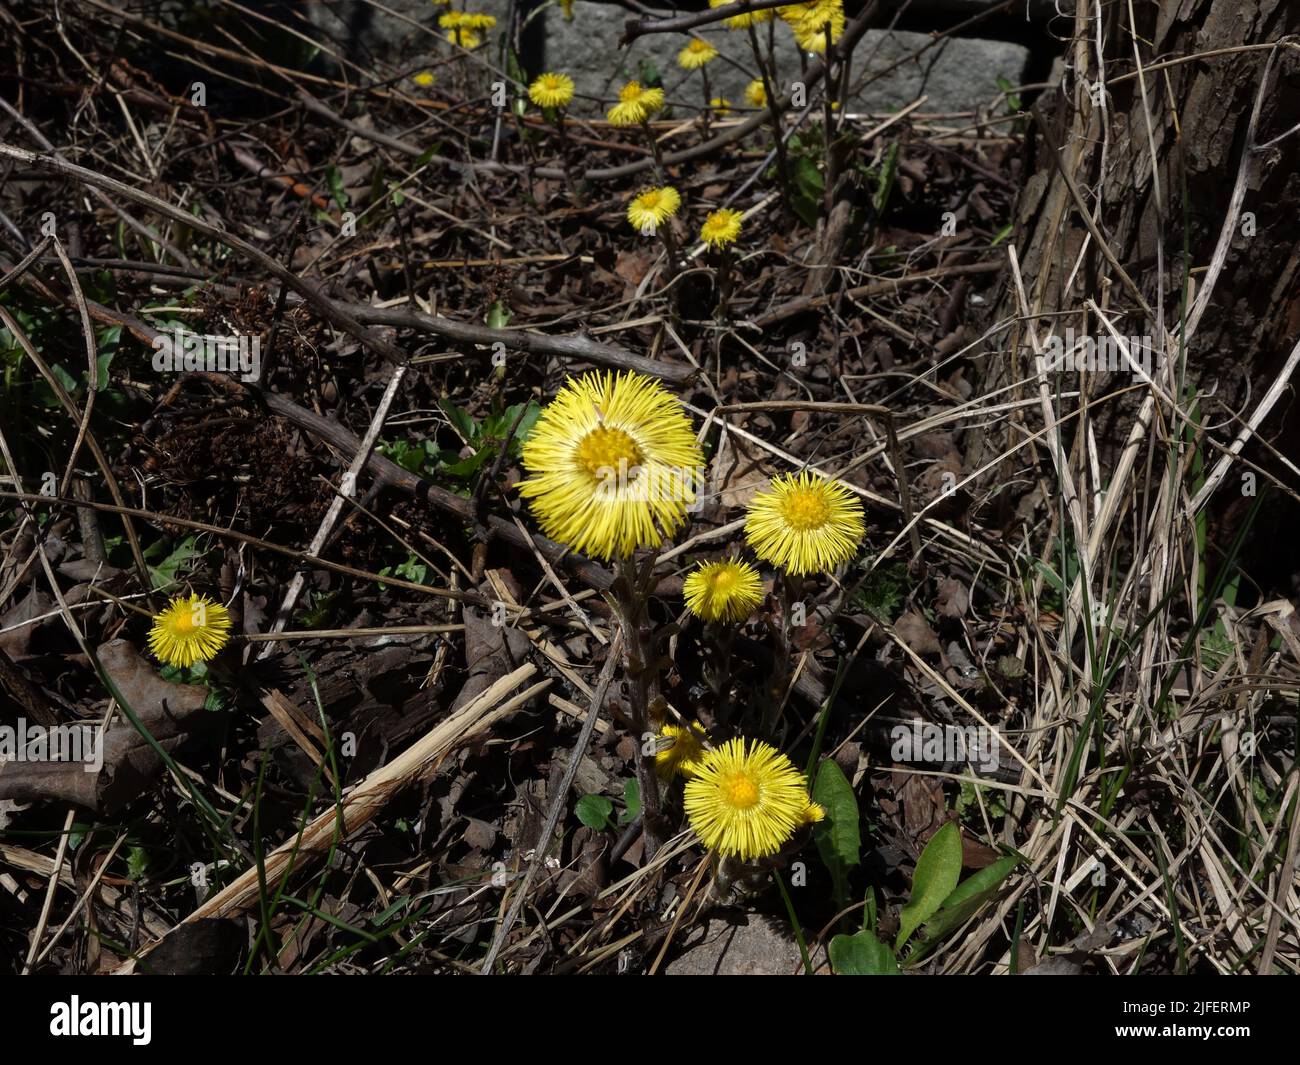 The yellow flower, Coltsfoot, shines and refreshes the otherwise gray roadside. Stock Photo